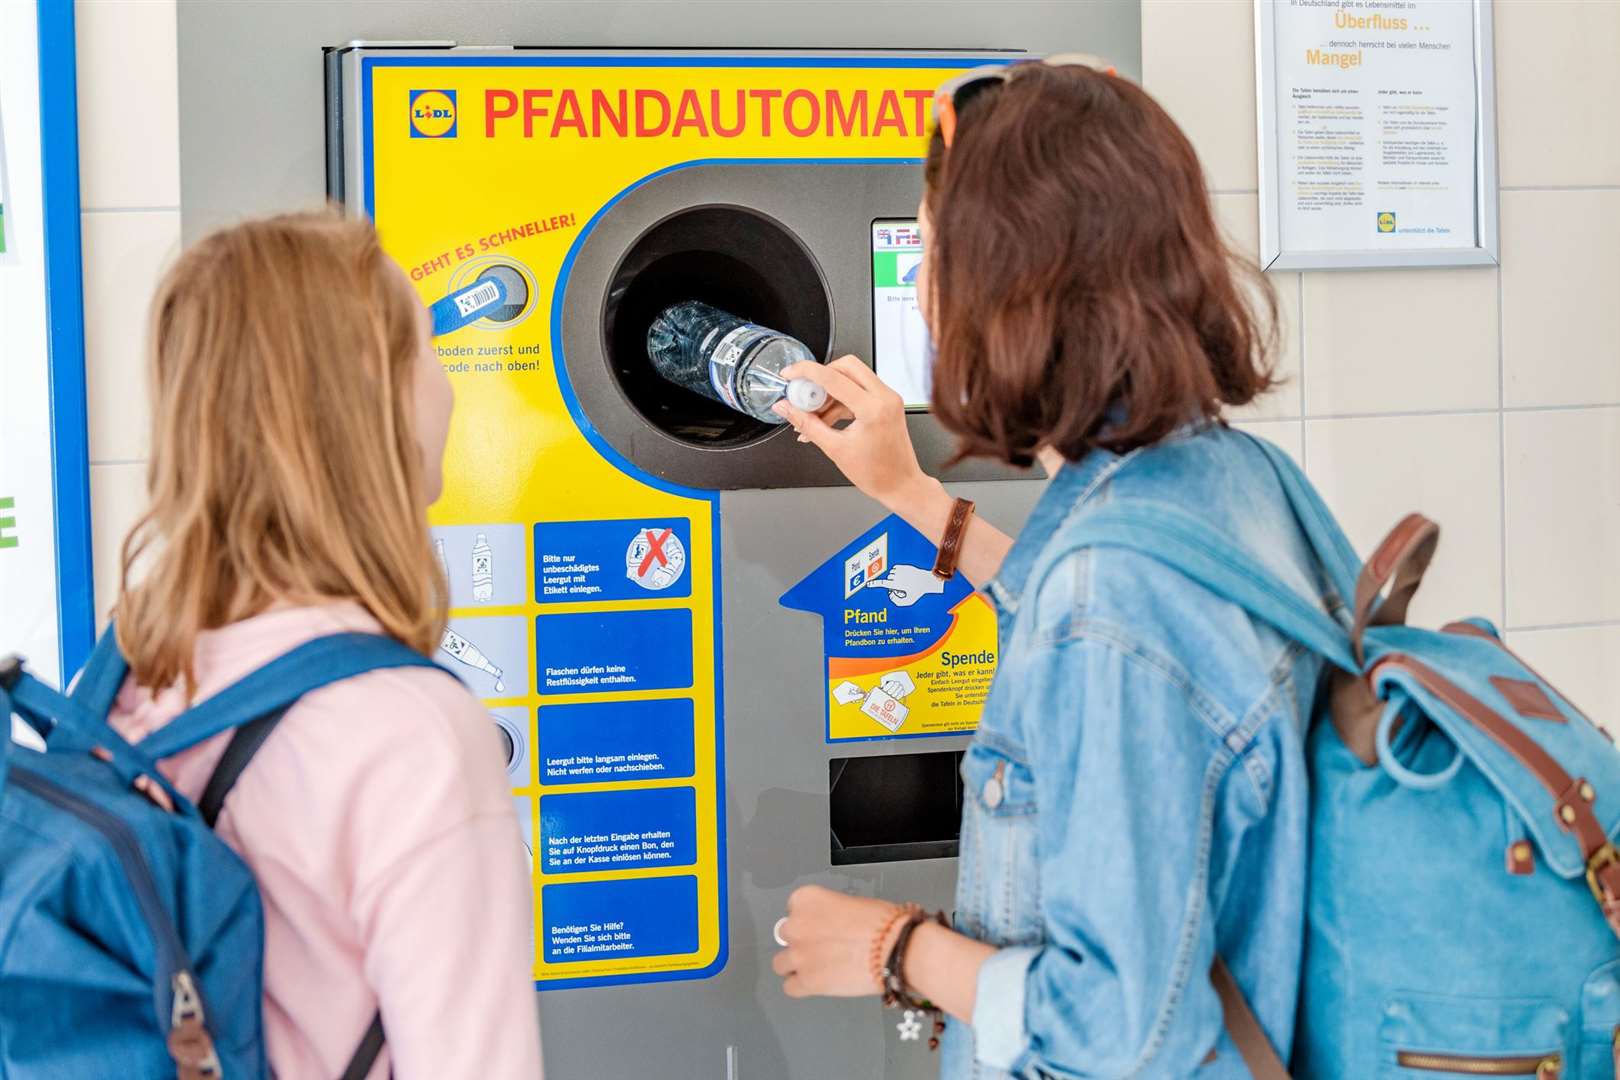 Reverse vending machines, like this one in Gemany, could soon be commonplace in the UK. Image: iStock.